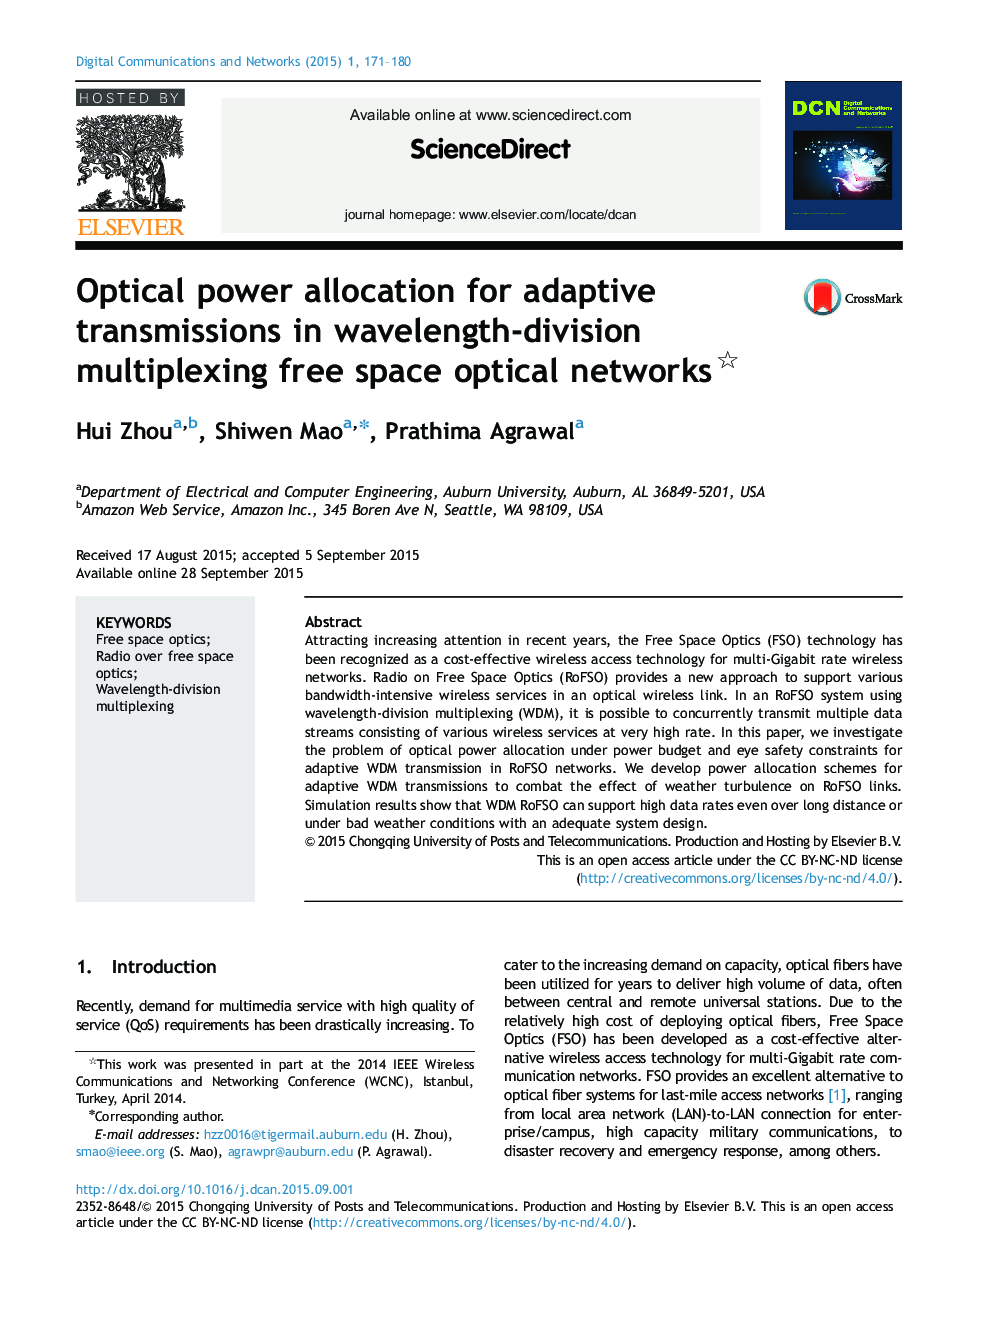 Optical power allocation for adaptive transmissions in wavelength-division multiplexing free space optical networks 